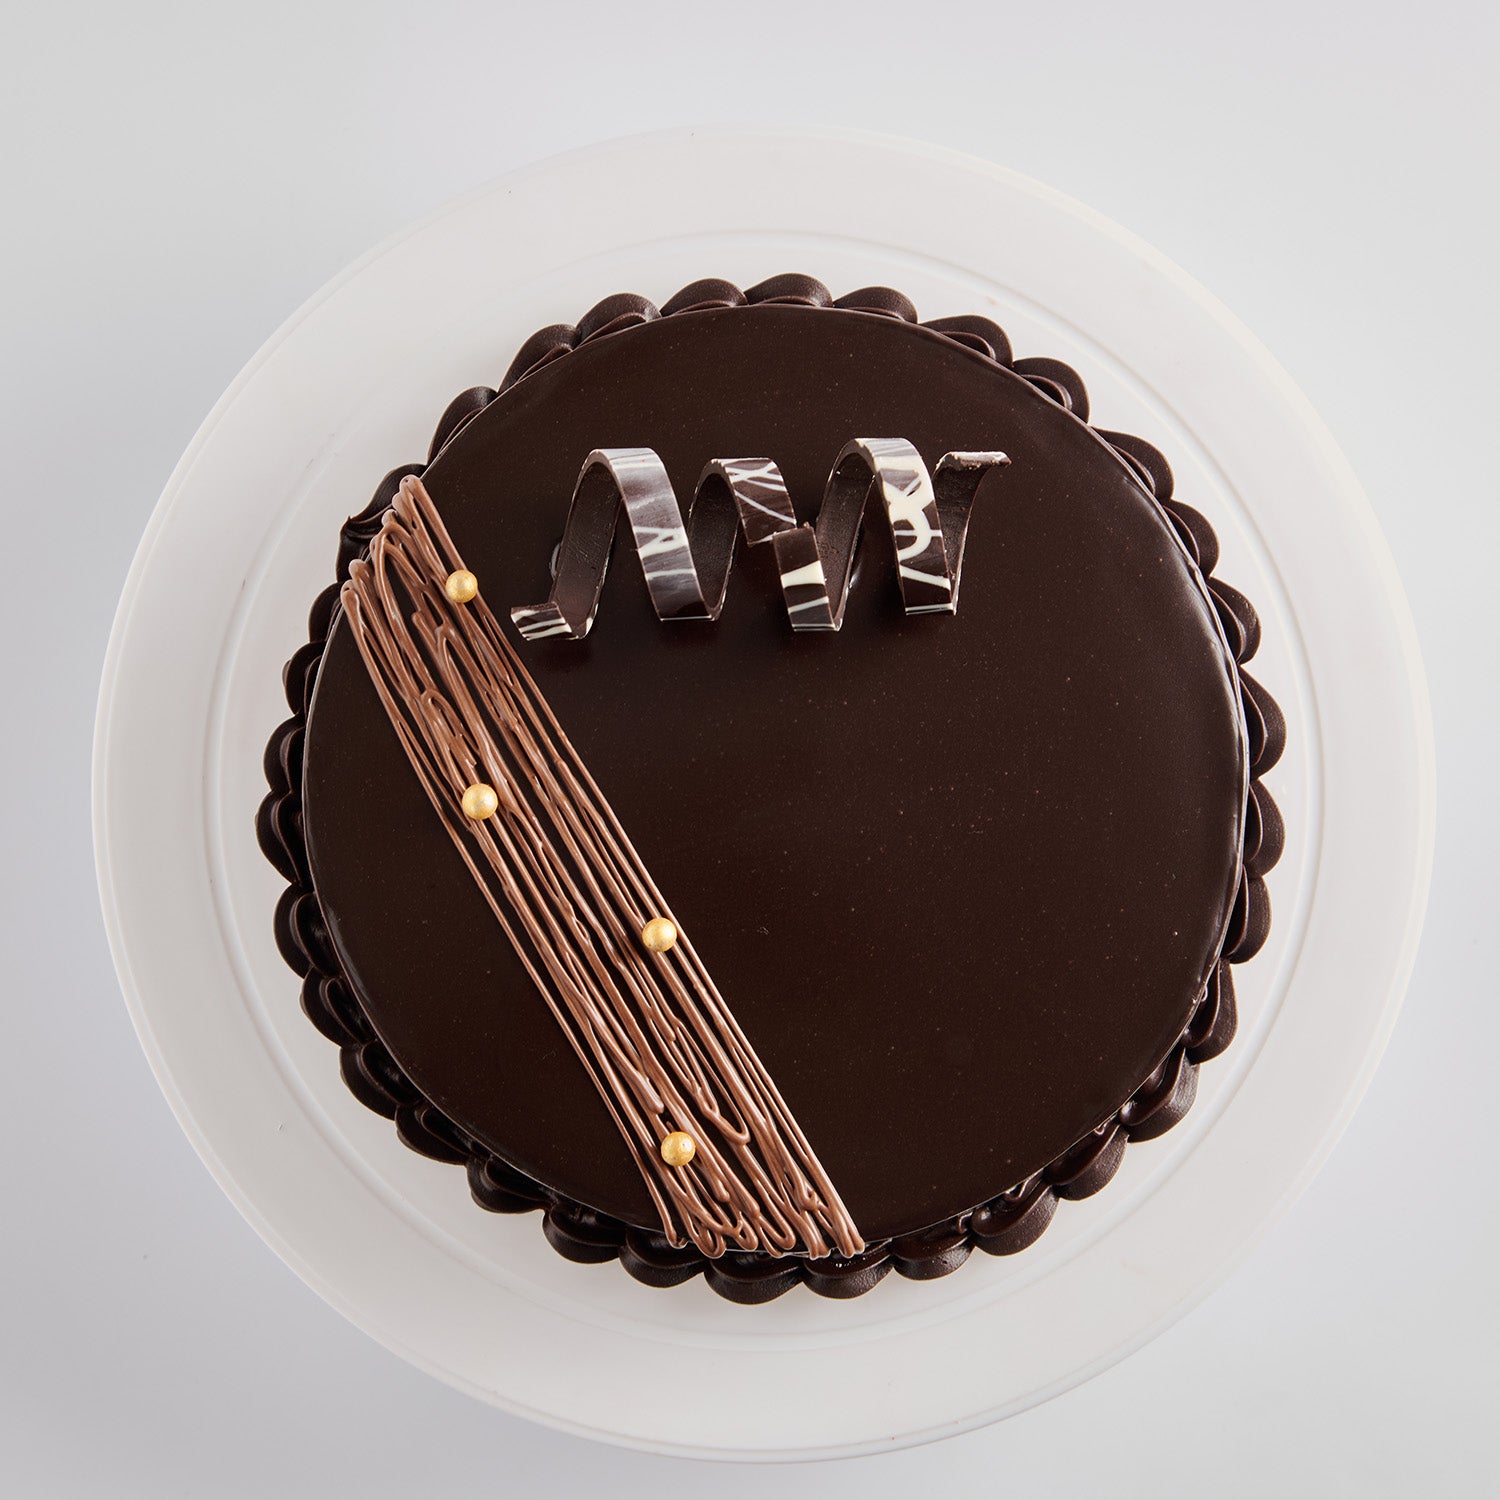 Buy 2 Tier Chocolate Truffle Cake Online at Best Price | Od